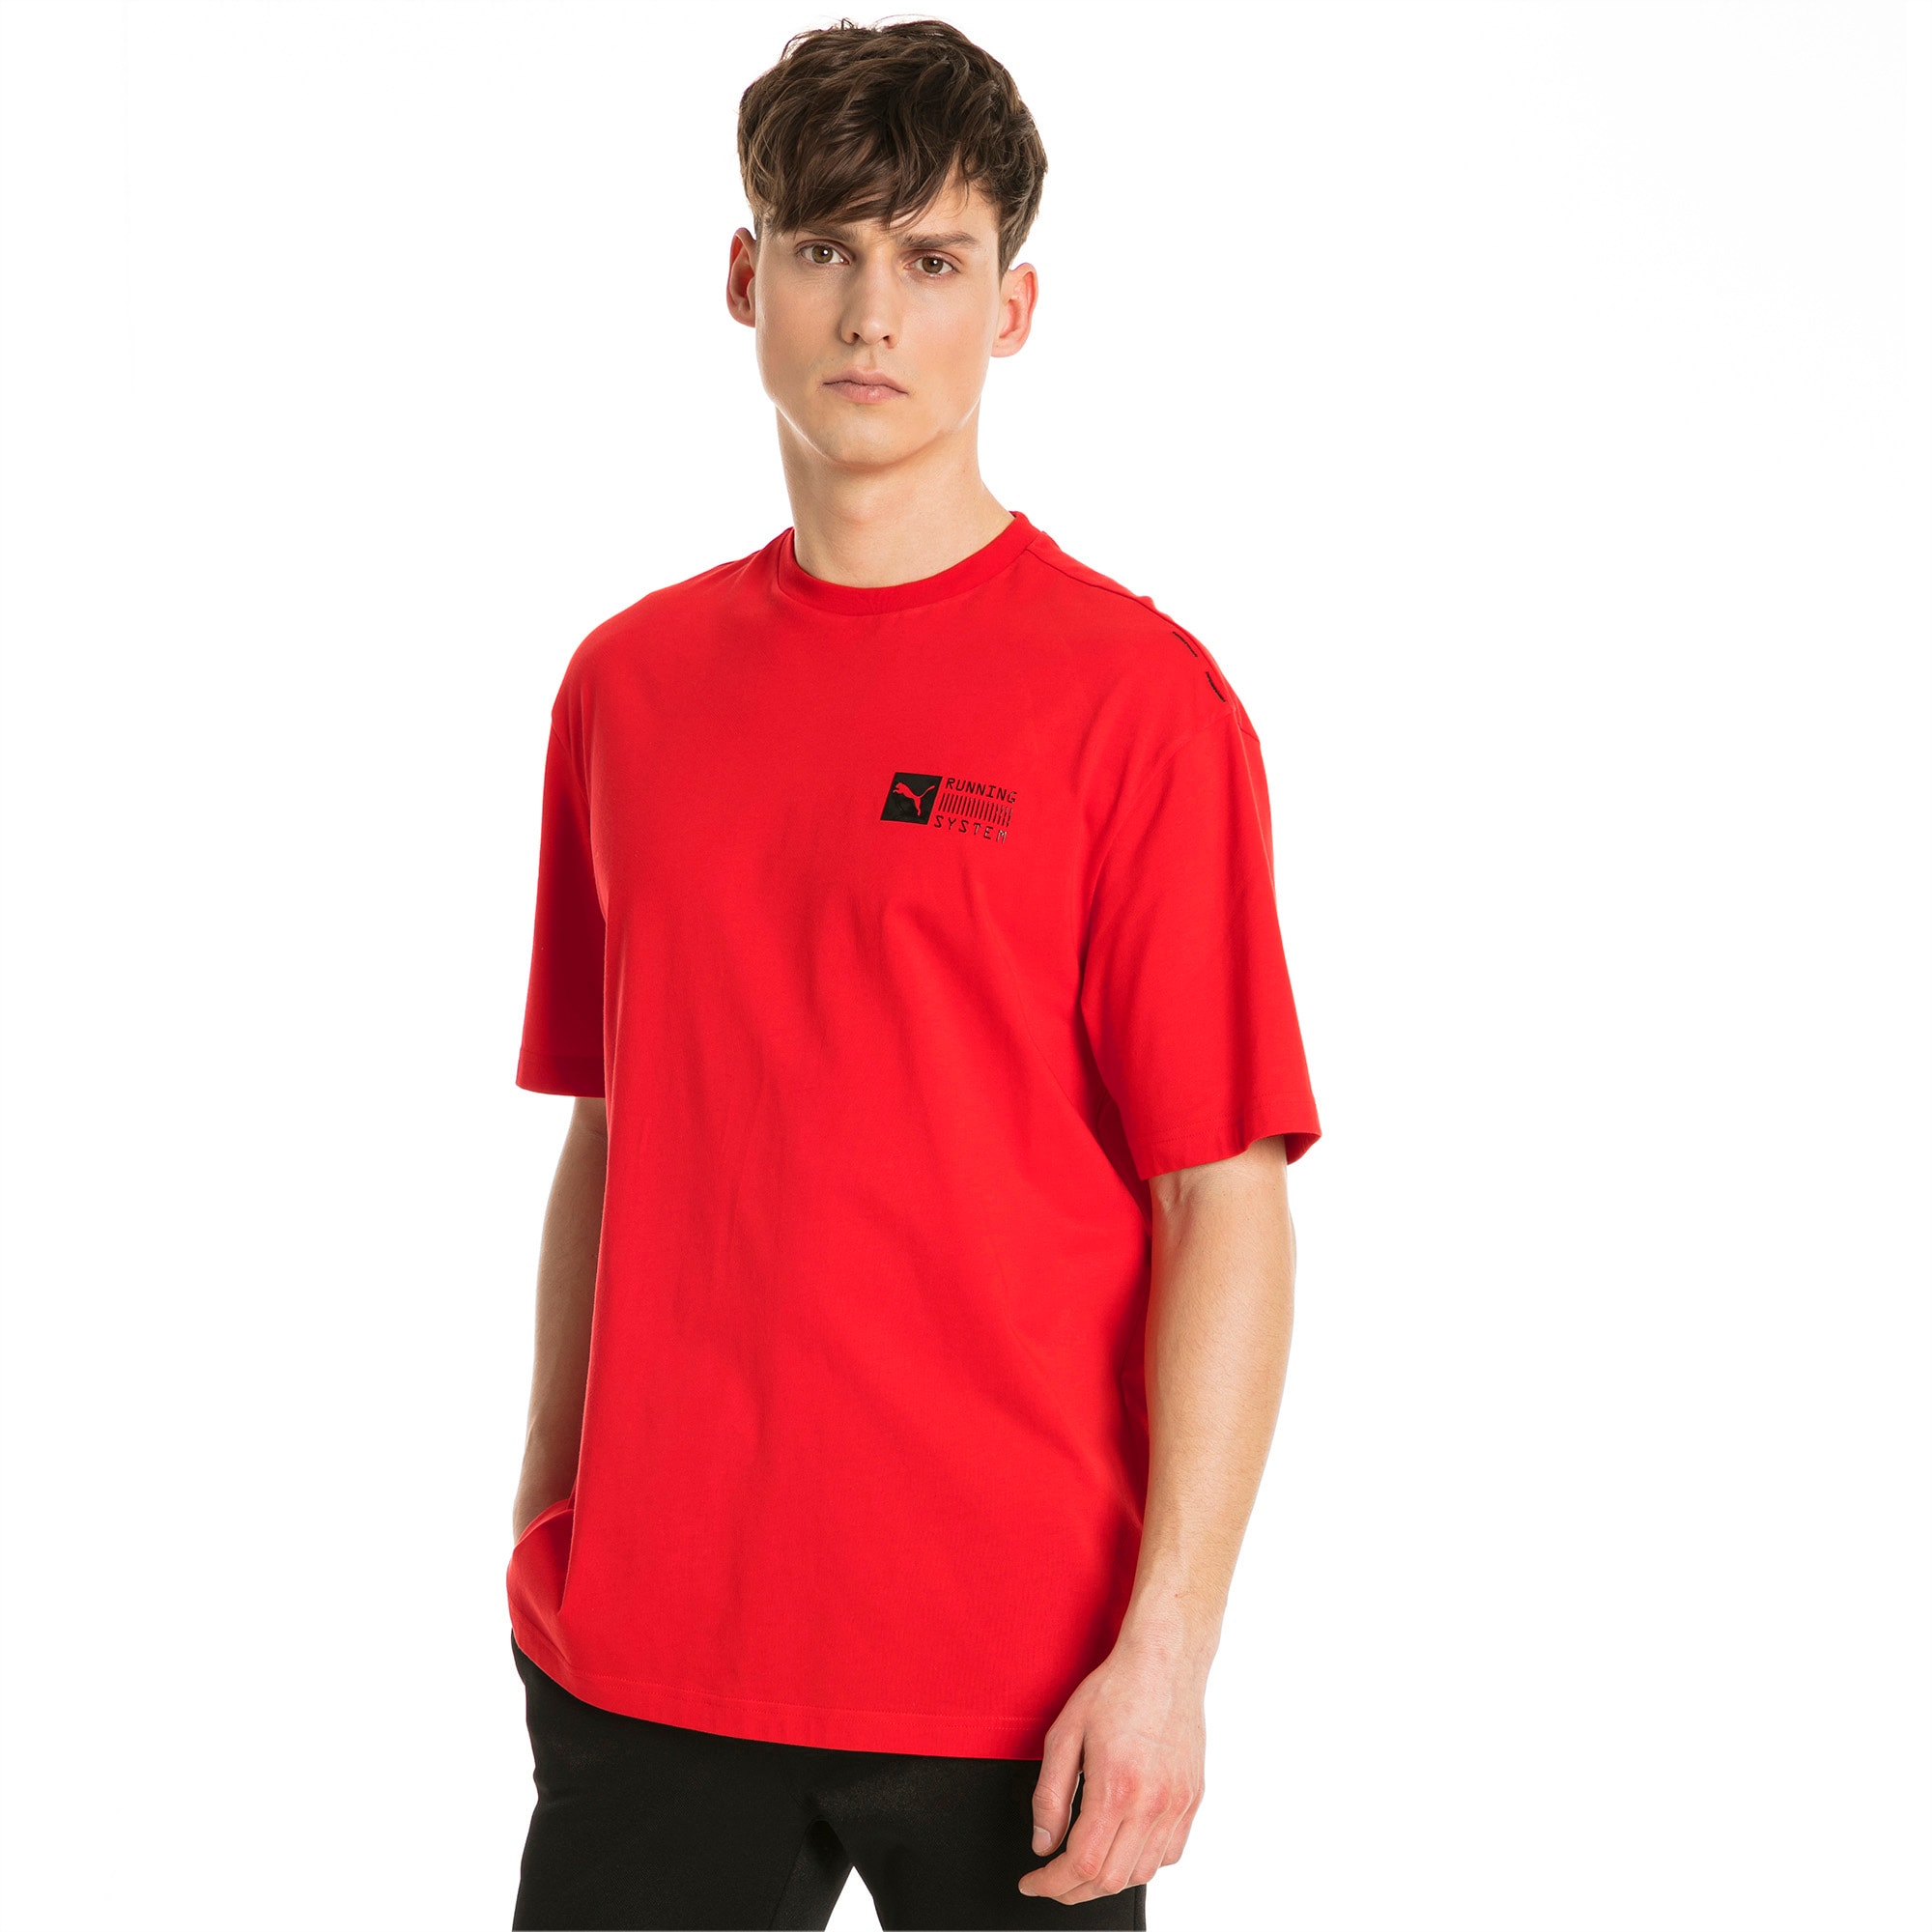 RS-0 Capsule Men's Tee, High Risk Red, large-SEA